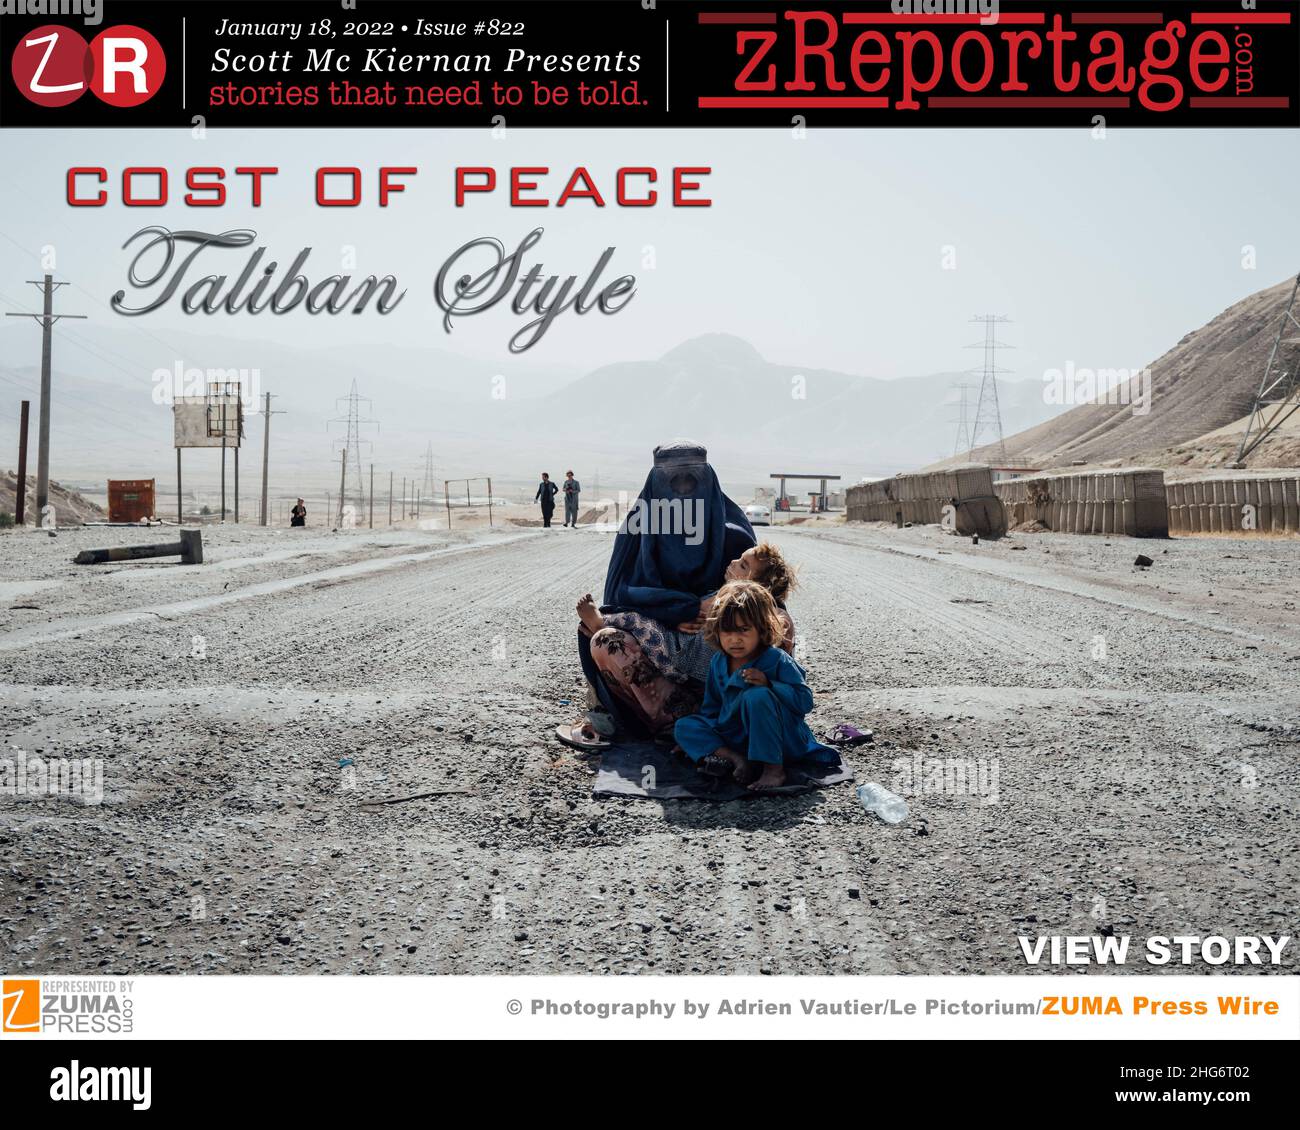 Story of the Week #822: TUESDAY January 18, 2022: 'COST OF PEACE: Taliban Style' from award winning photographer Adrien Vautier of Le Pictorium: Since the Taliban swept back to power in Afghanistan in August, they have been enforcing their fundamentalist interpretation of Islam. In spite of trying to rebrand as more moderate, the group has imposed a slew of restrictions that revoke the liberties that Afghan women have won through a history of struggle and activism, and unravel the gains made over the past two decades. Most secondary schools for girls were closed, and women were prohibited from Stock Photo